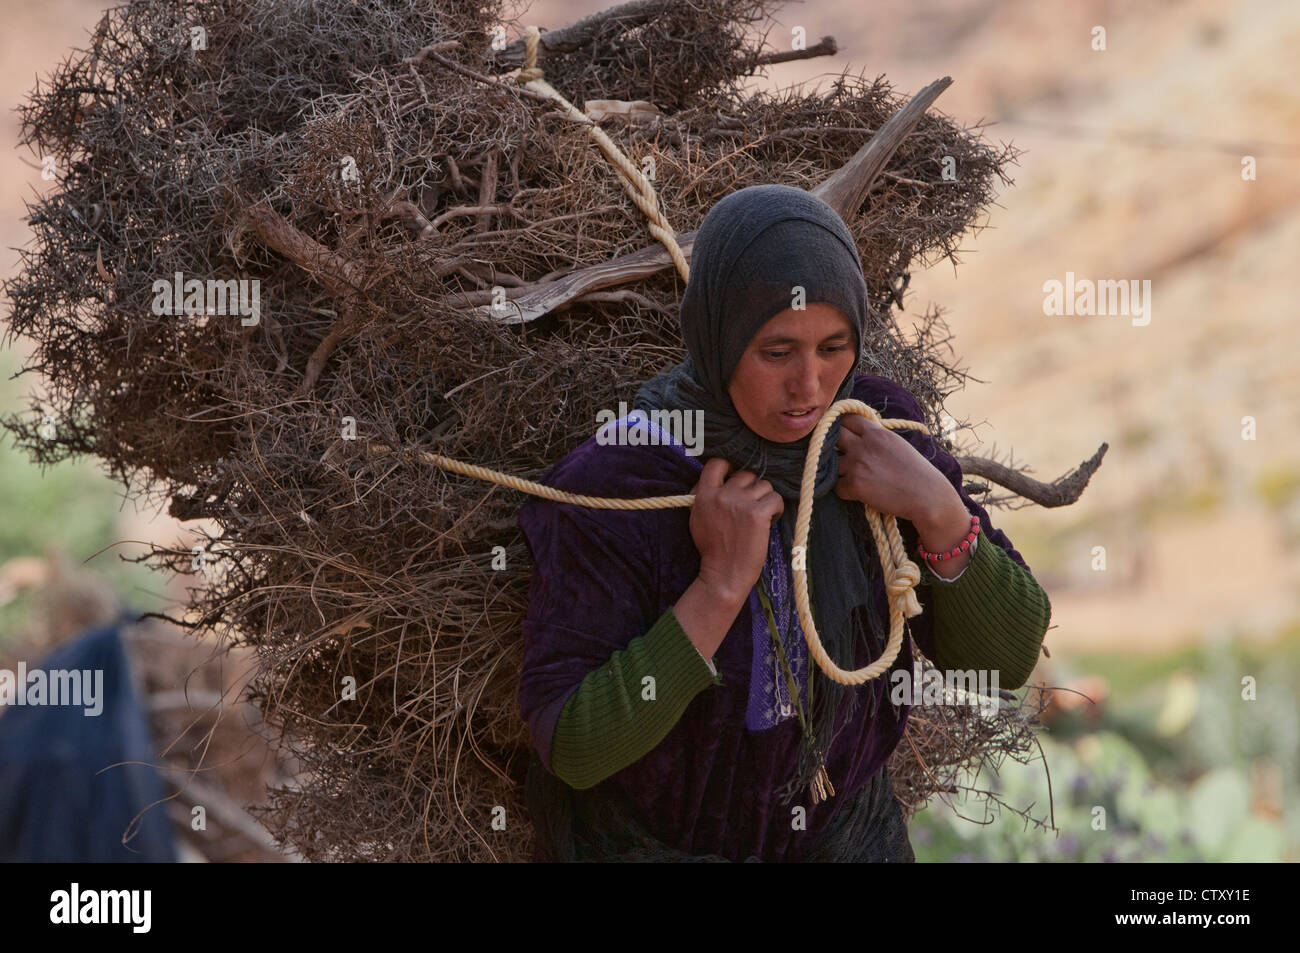 Berber woman carrying a load in the Southern Atlas Mountains, Morocco Stock Photo